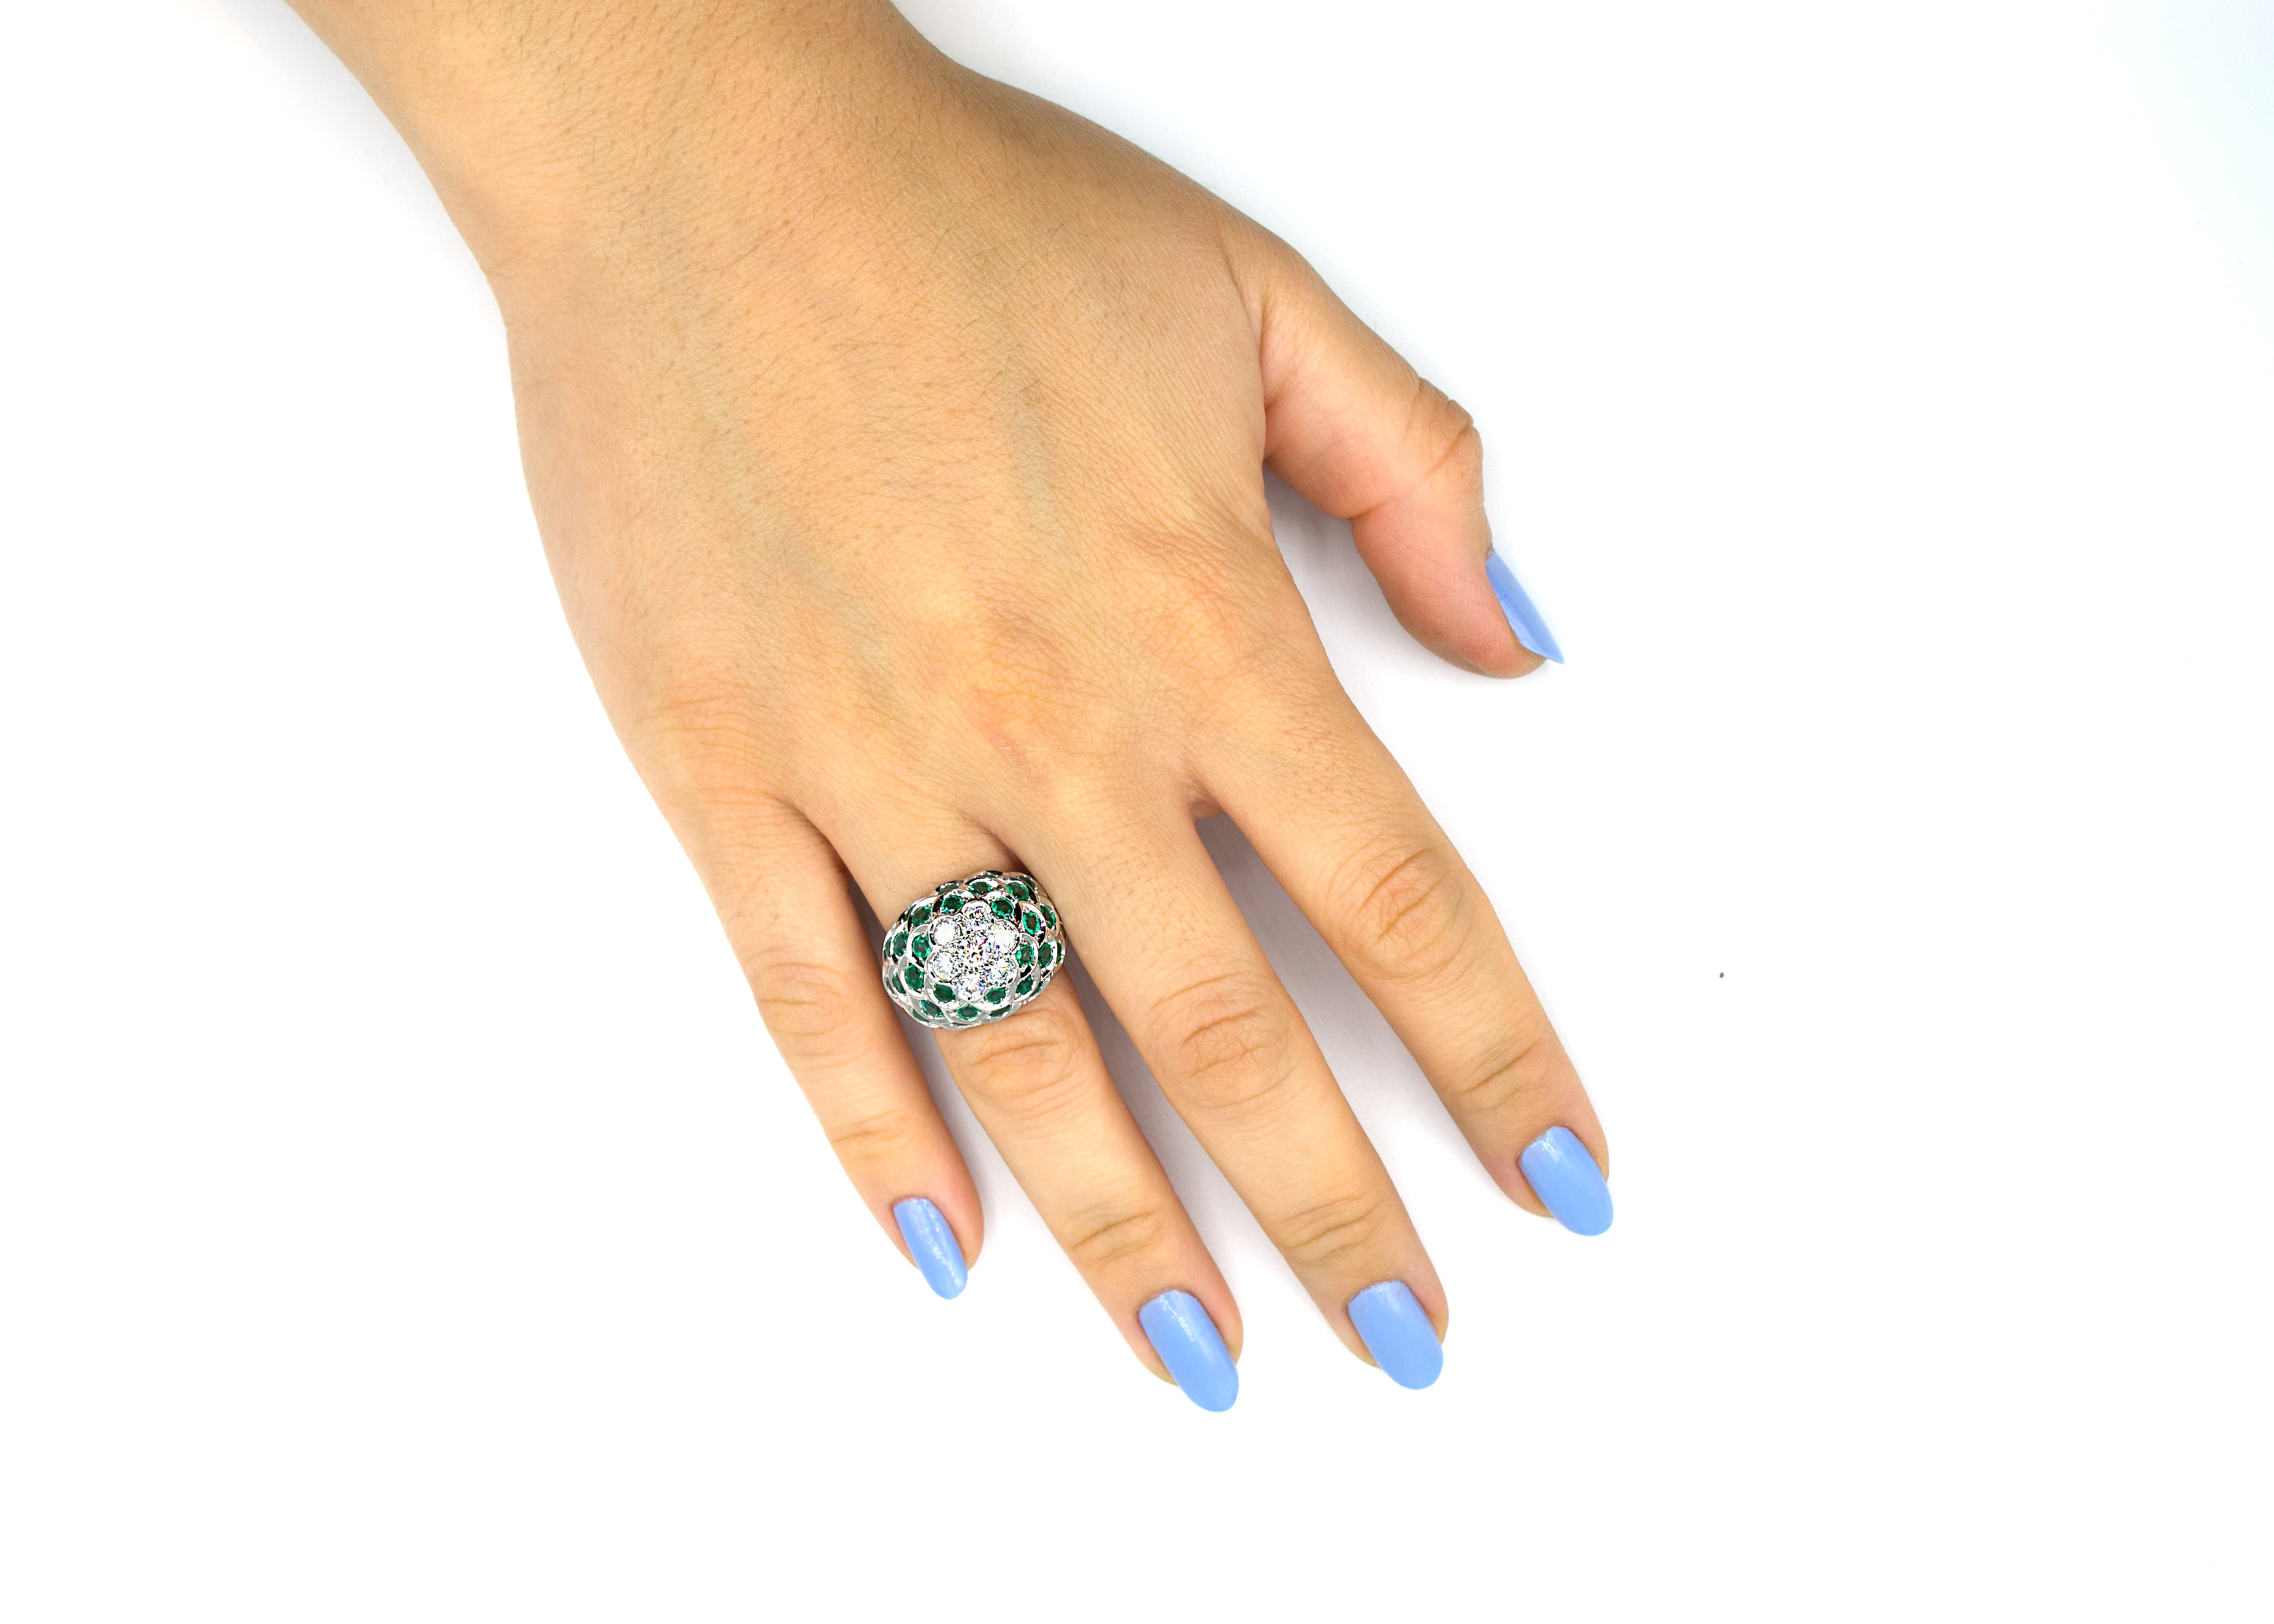 Diamond and Emerald Flower Dome Ring